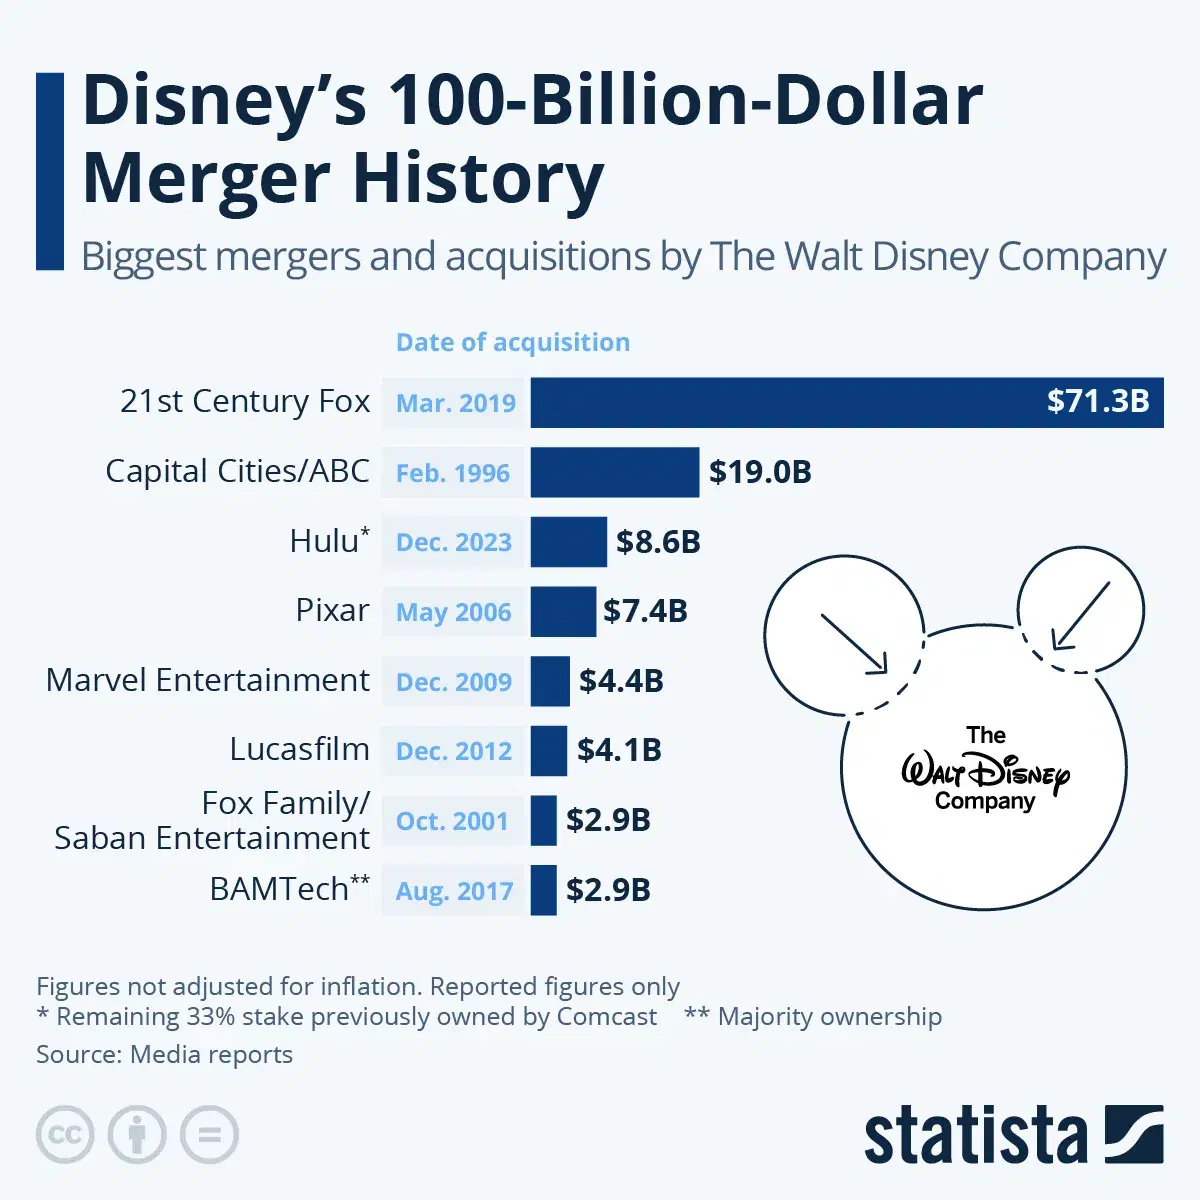 What Are Disney's Biggest Acquisitions?